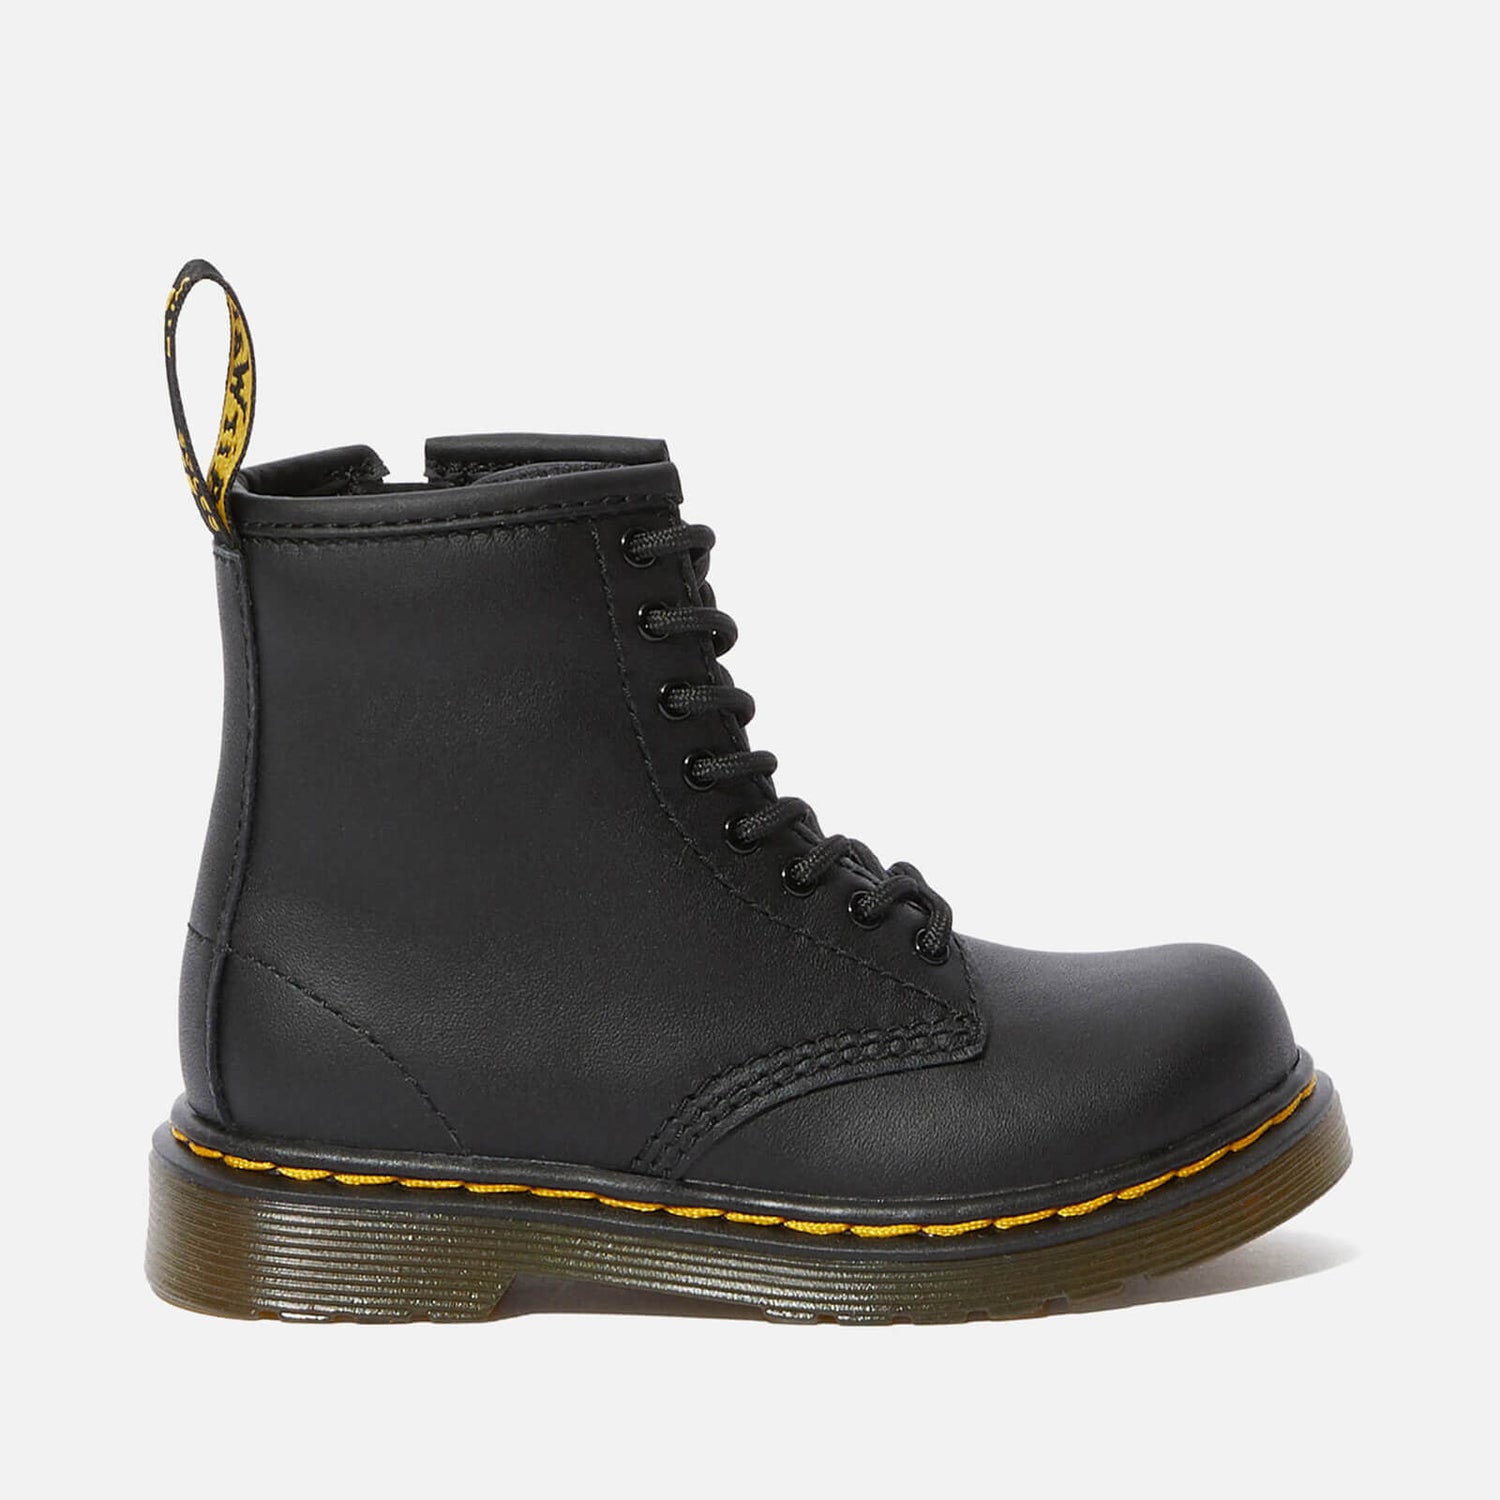 Dr. Martens Toddlers' 1460 Leather Lace-Up Boots - Black - UK 5.5 Toddler